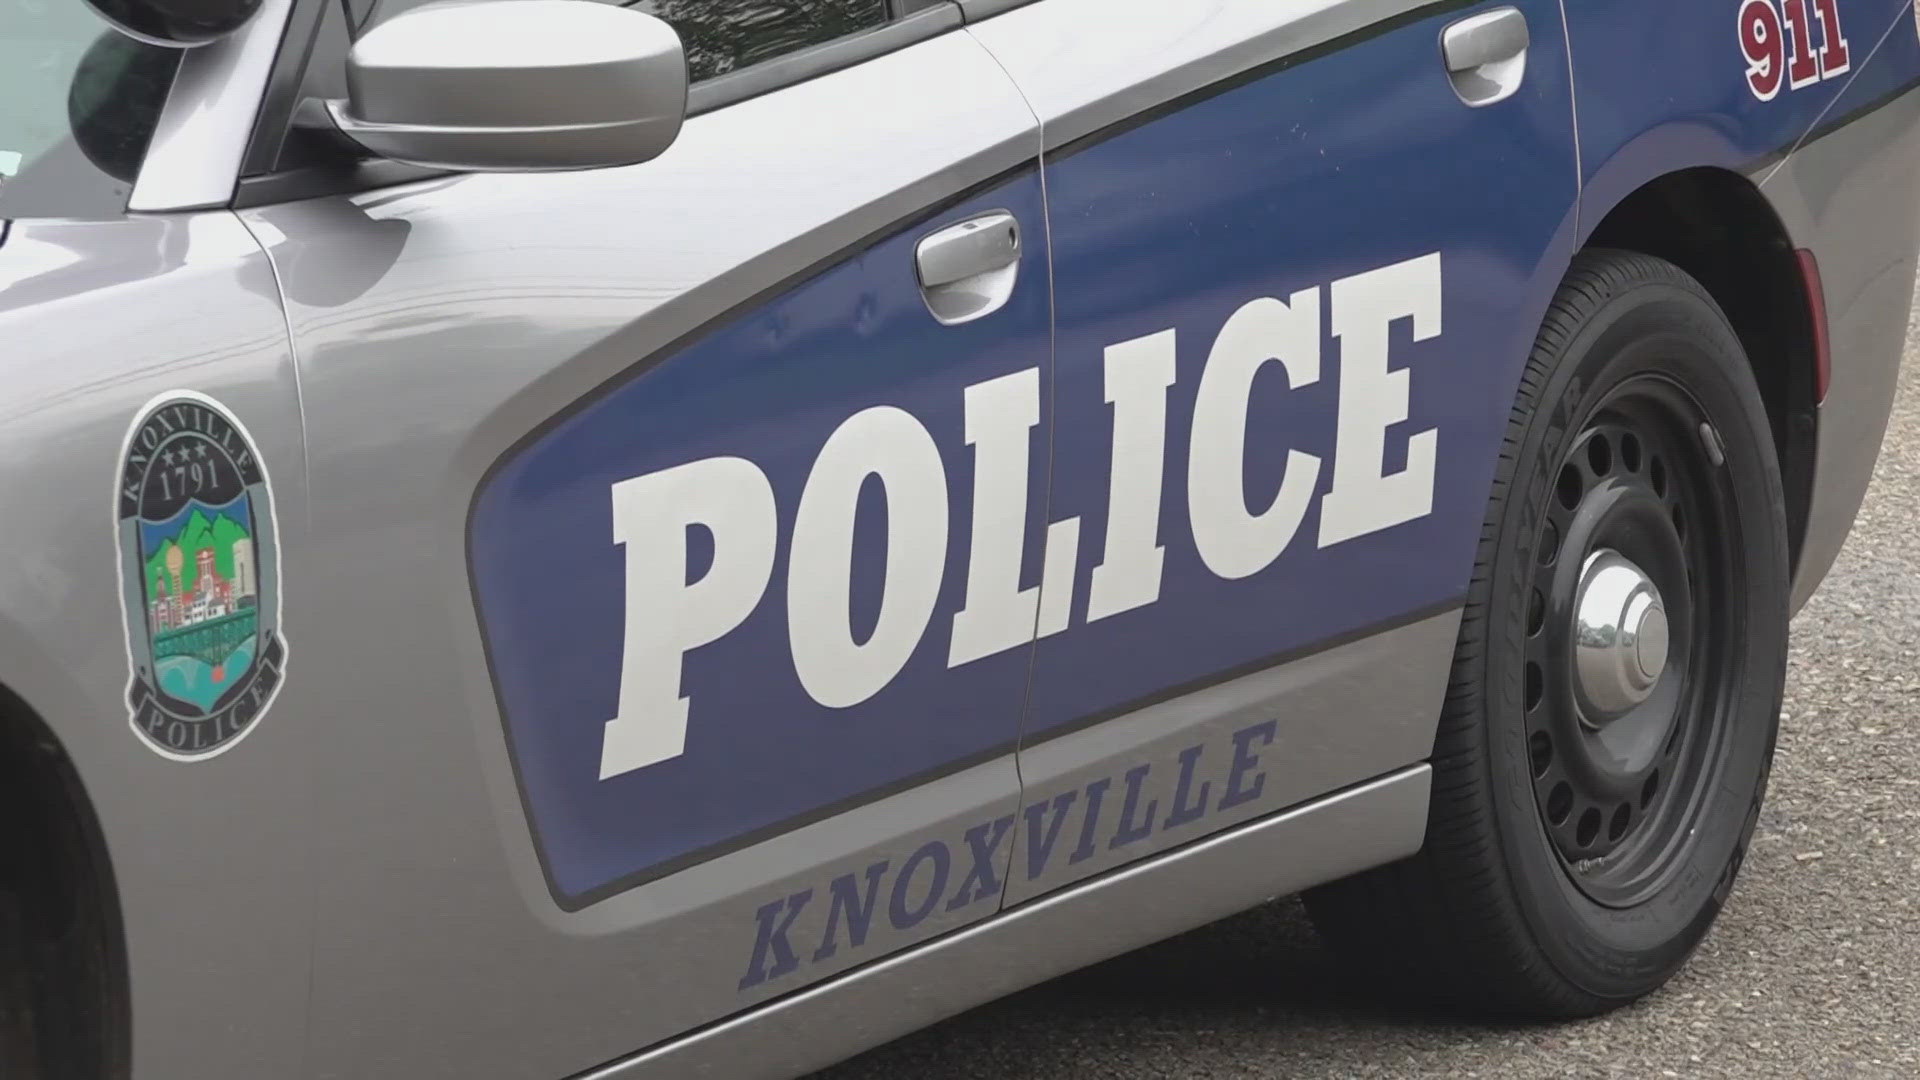 Records show the Knoxville Police Department responded to the same address for a domestic disturbance two months before the shooting.